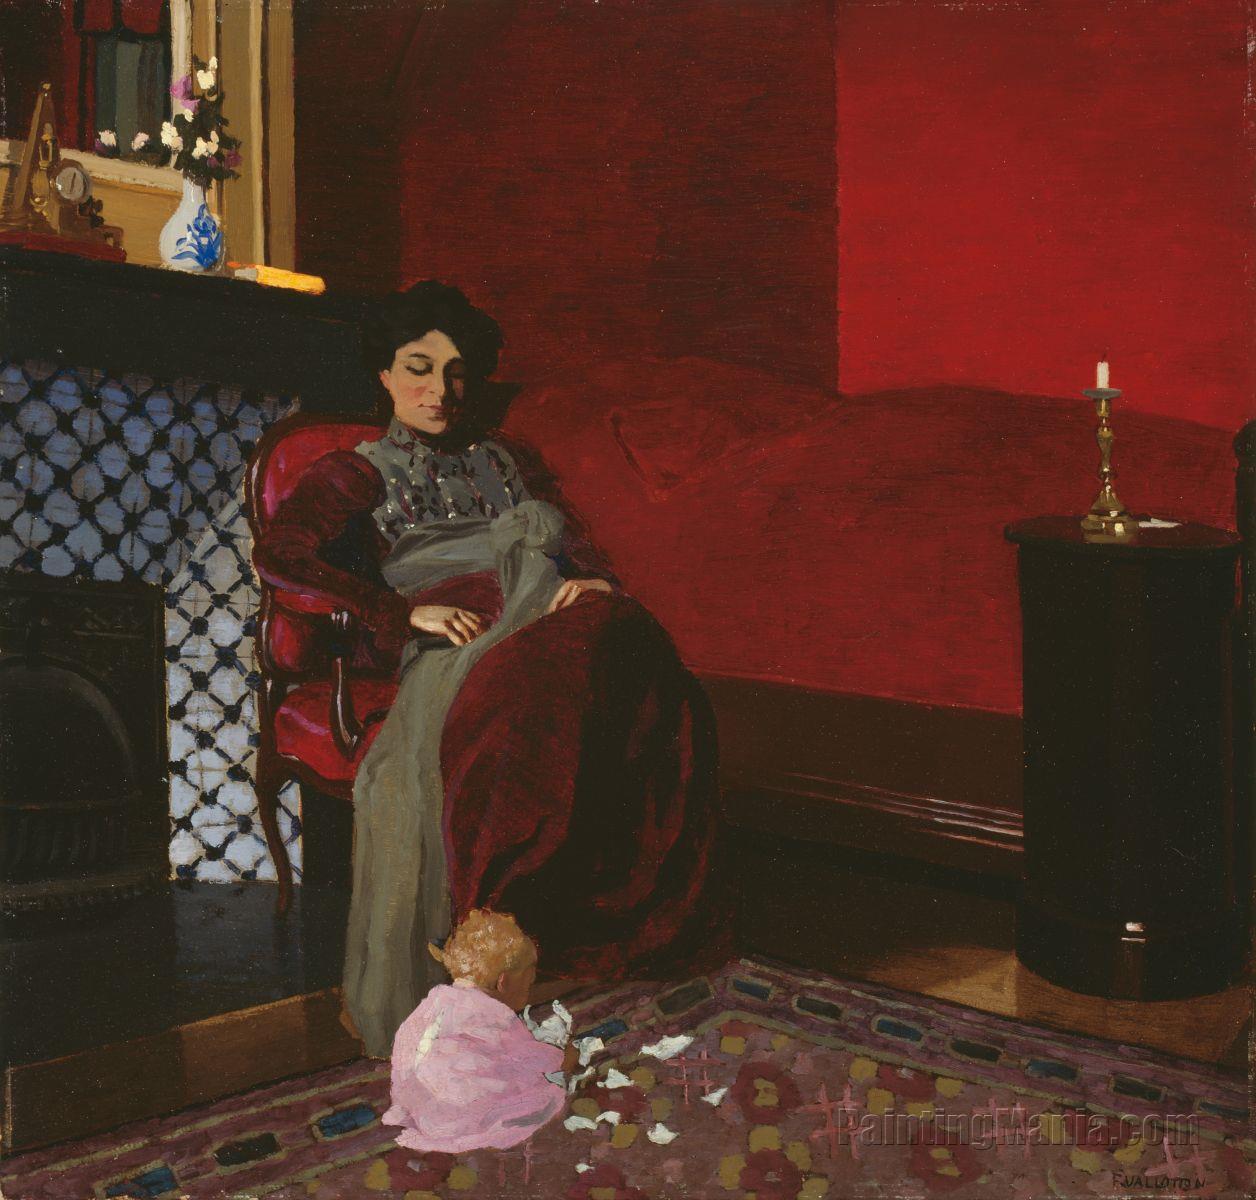 Madame Vallotton and her Niece, Germaine Aghion